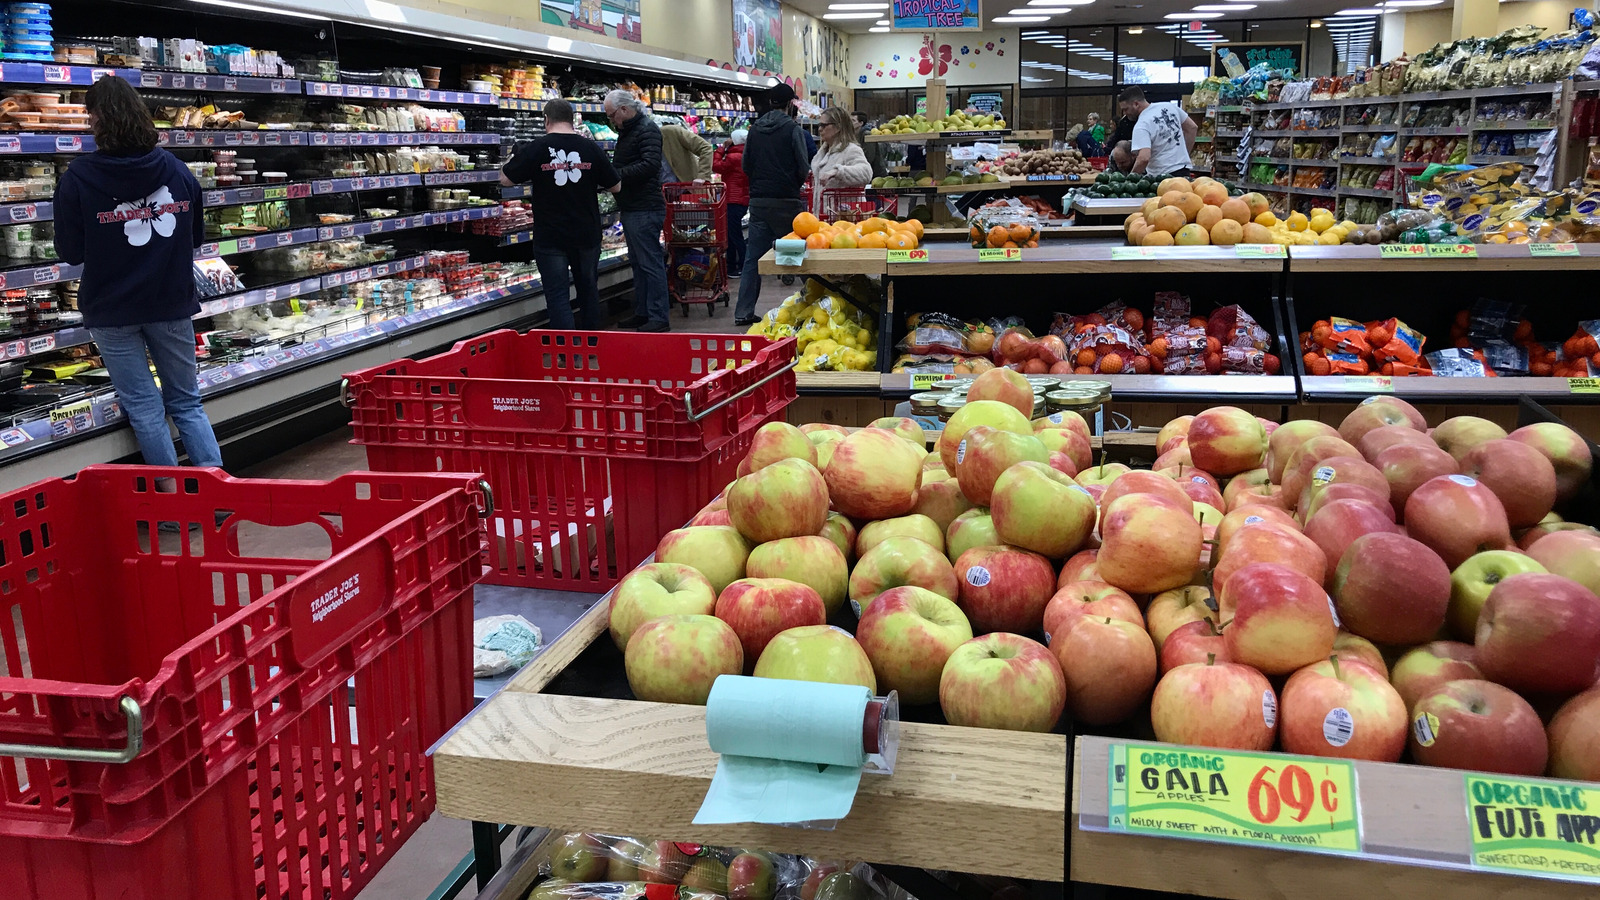 Trader Joe's Apple Product Names That Pushed The Envelope